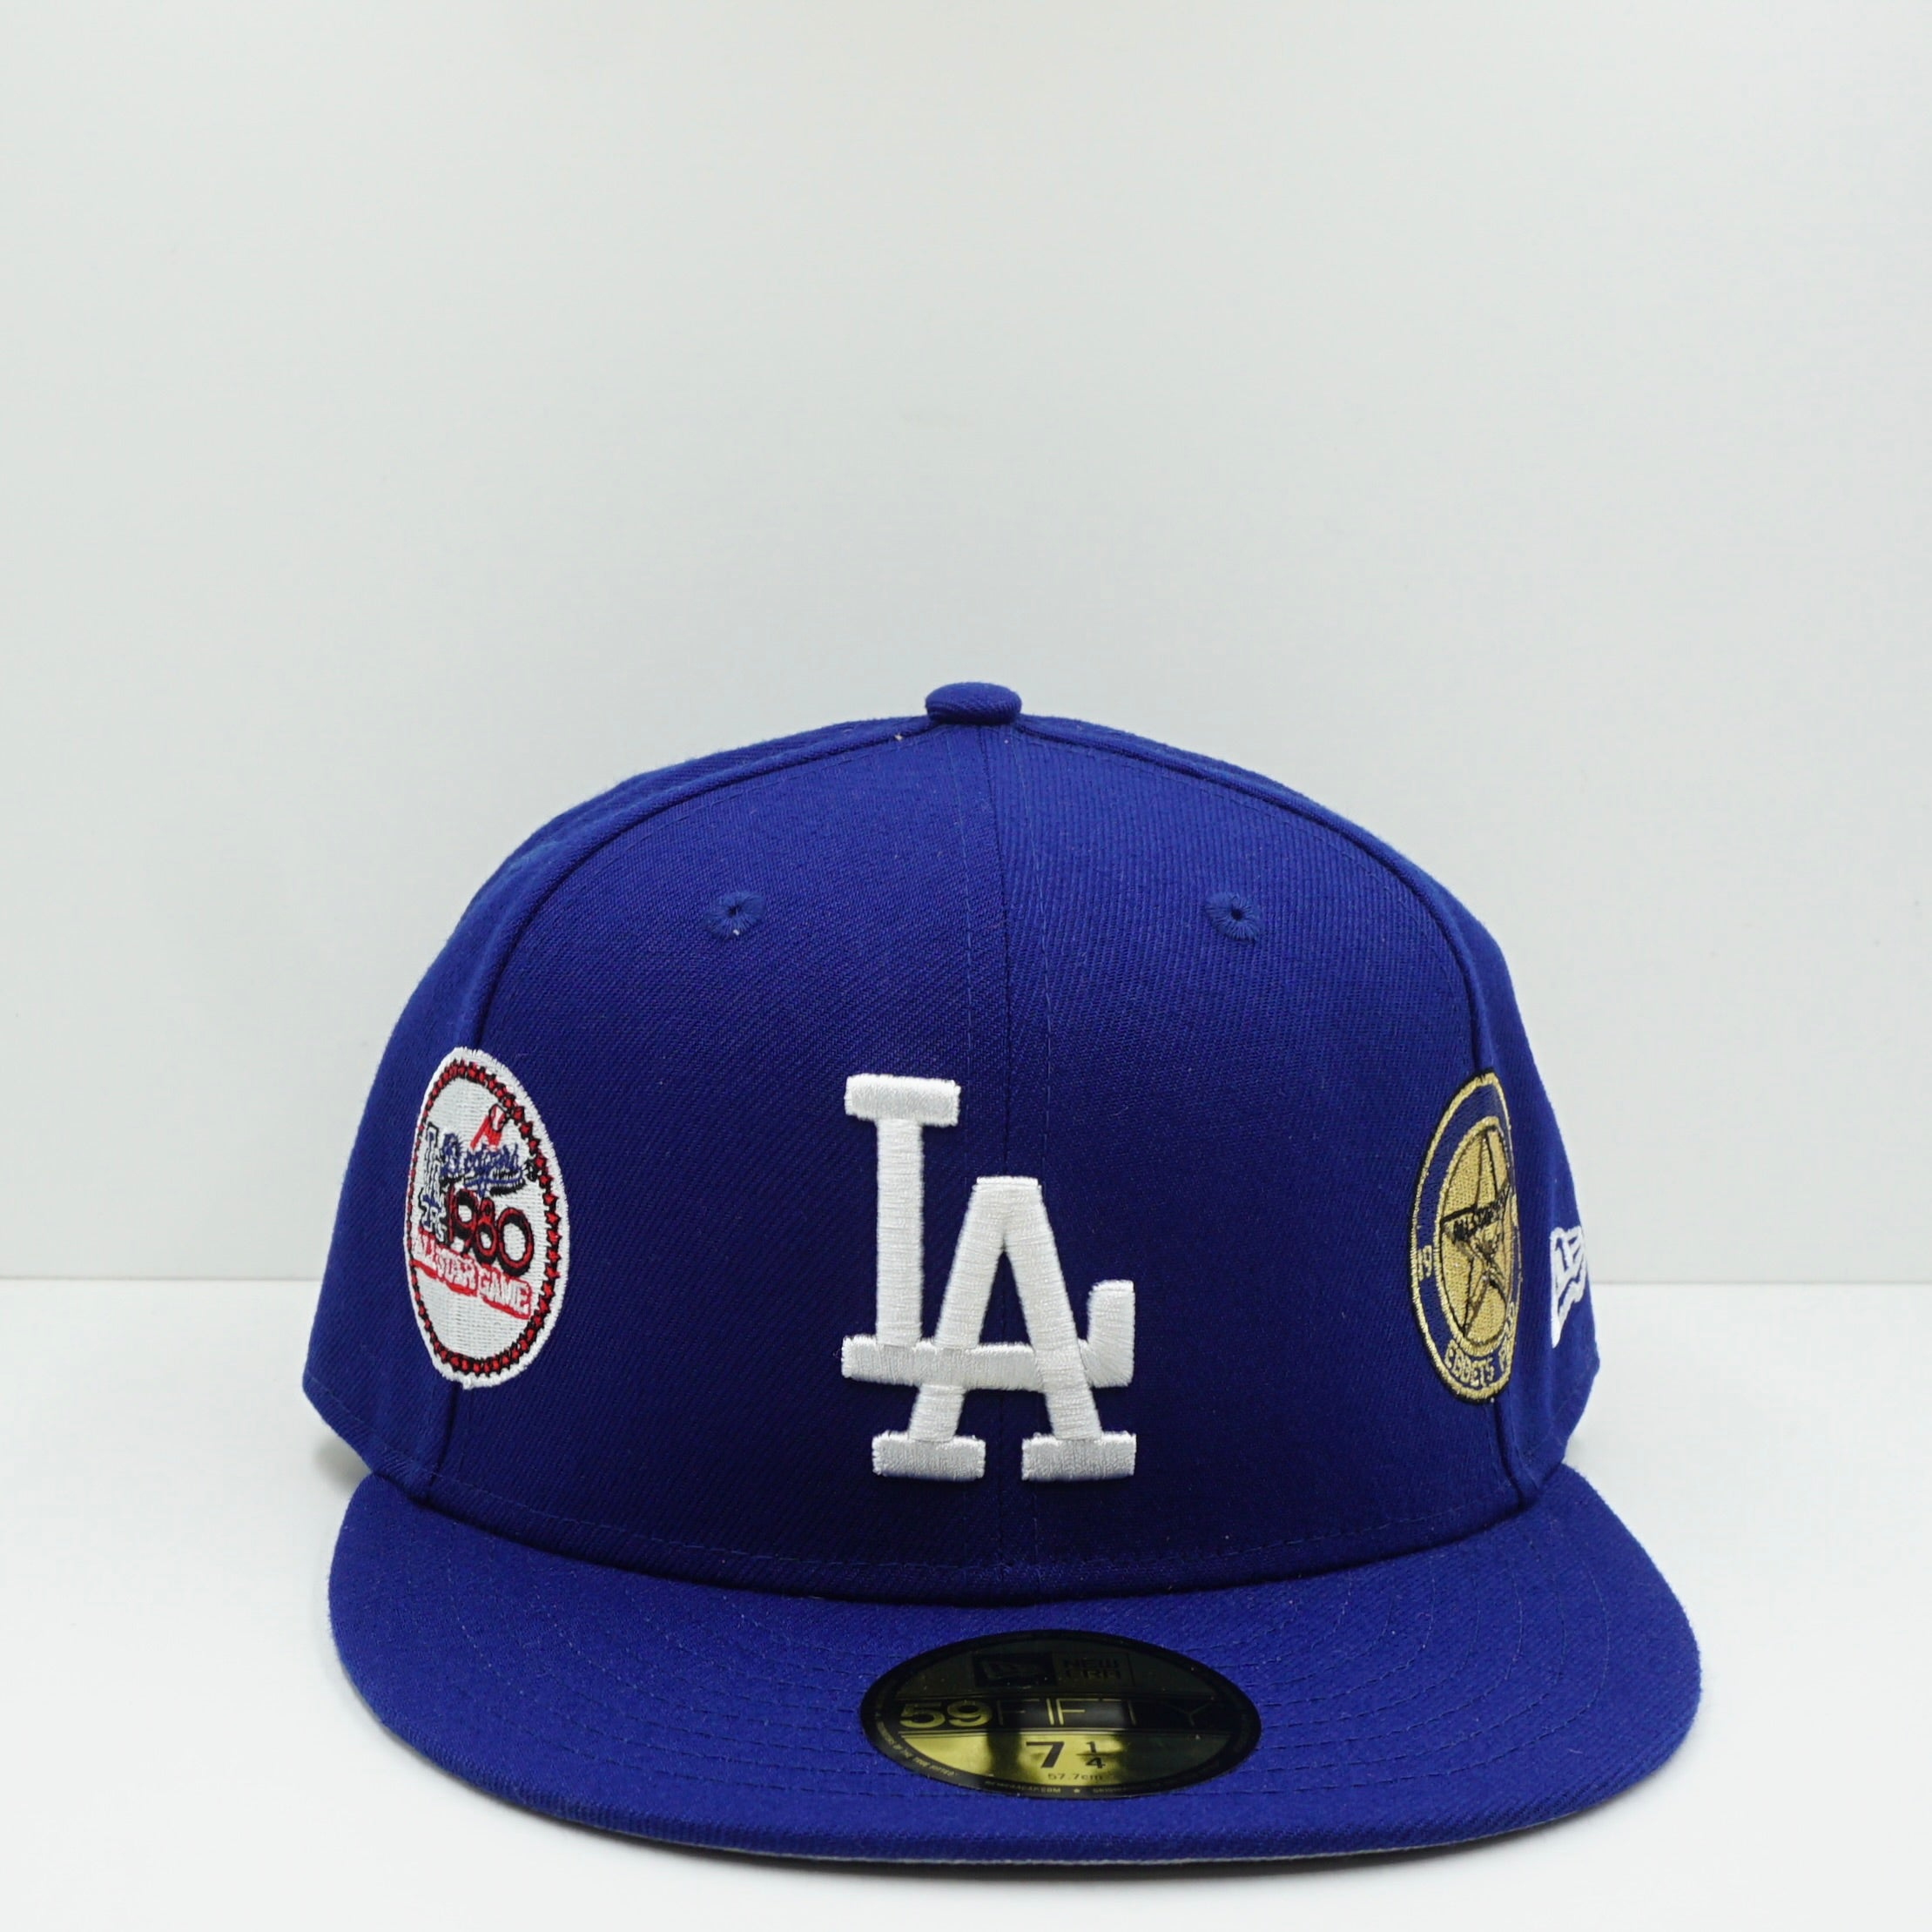 New Era Cooperstown Los Angeles Dodgers Multi Logo Fitted Cap